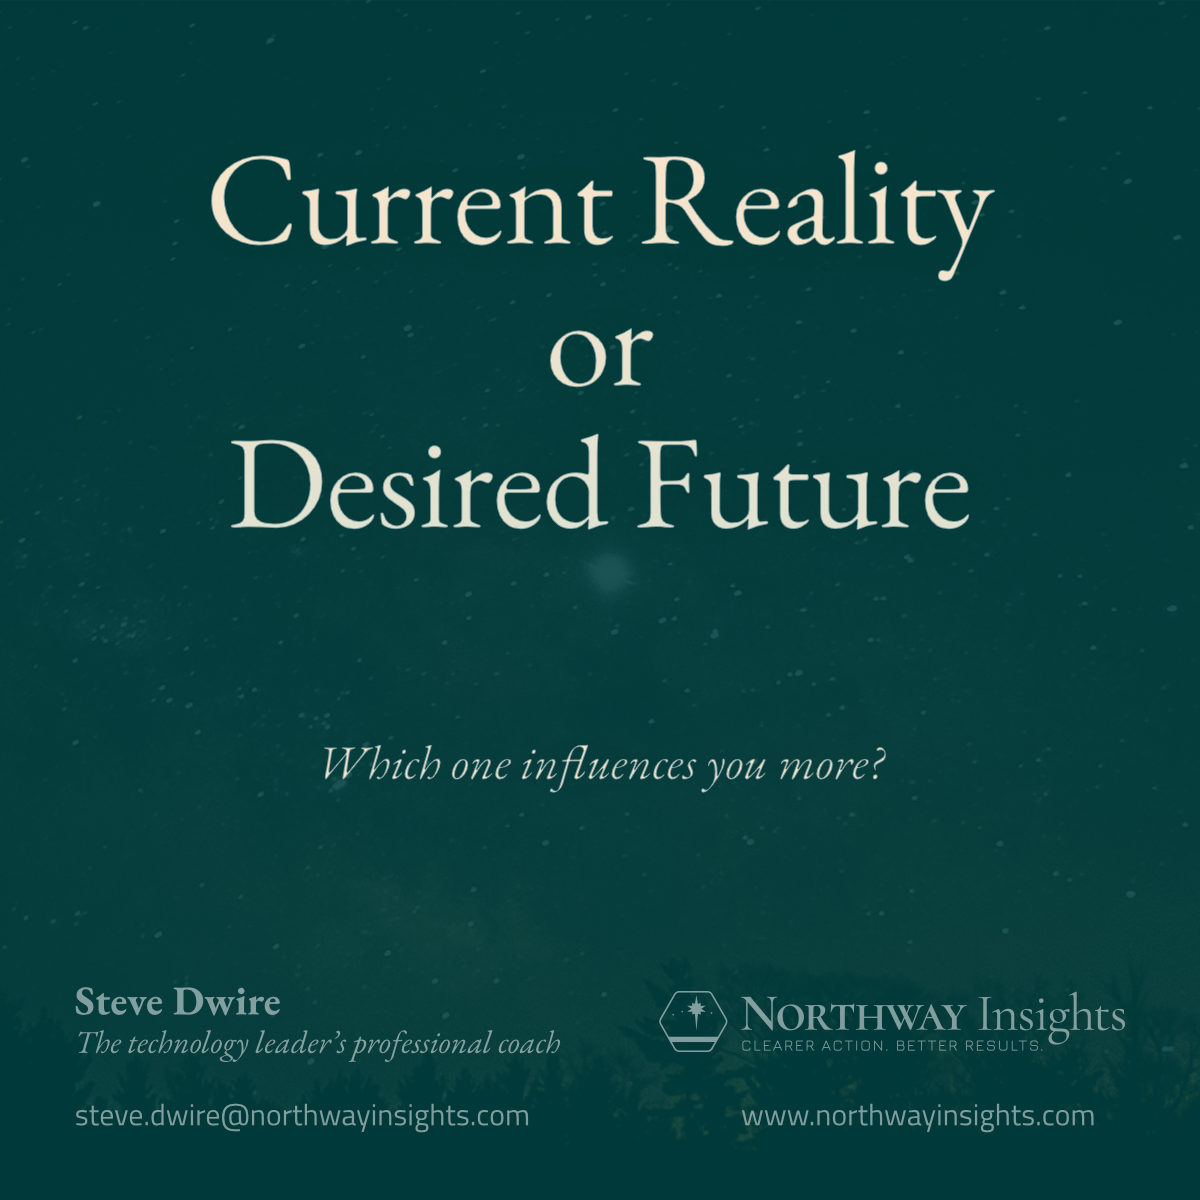 Current Reality or Desired Future (Which one influences you more?)